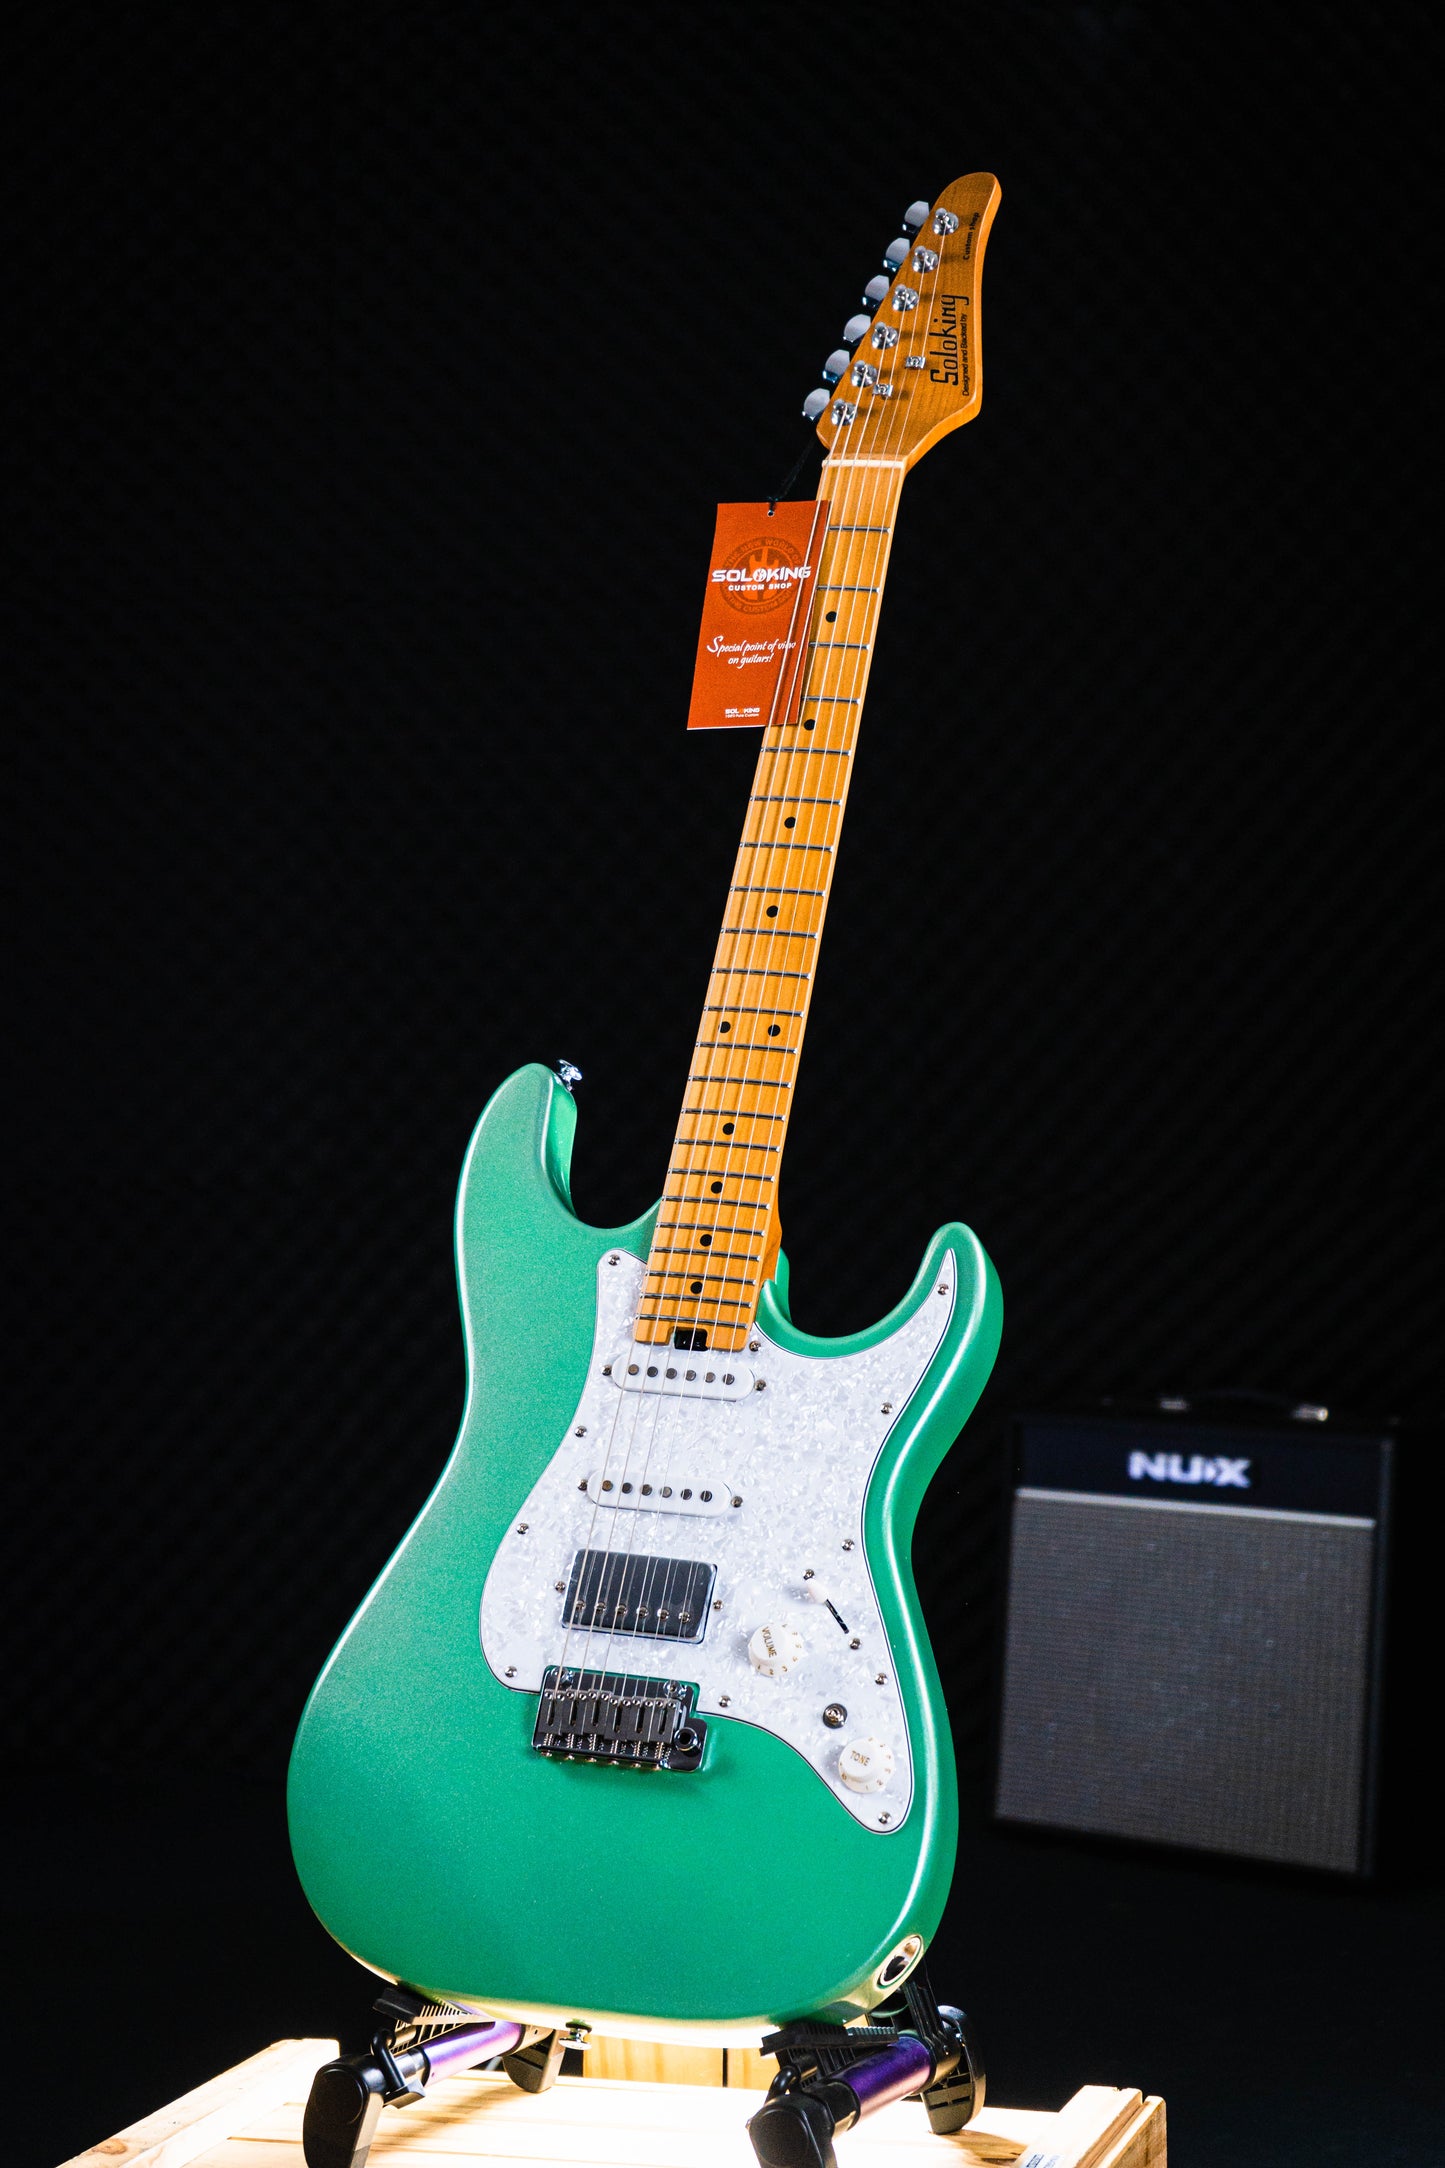 Soloking MS-1 Classic in Sage Green Metallic with Roasted Maple Neck and FB